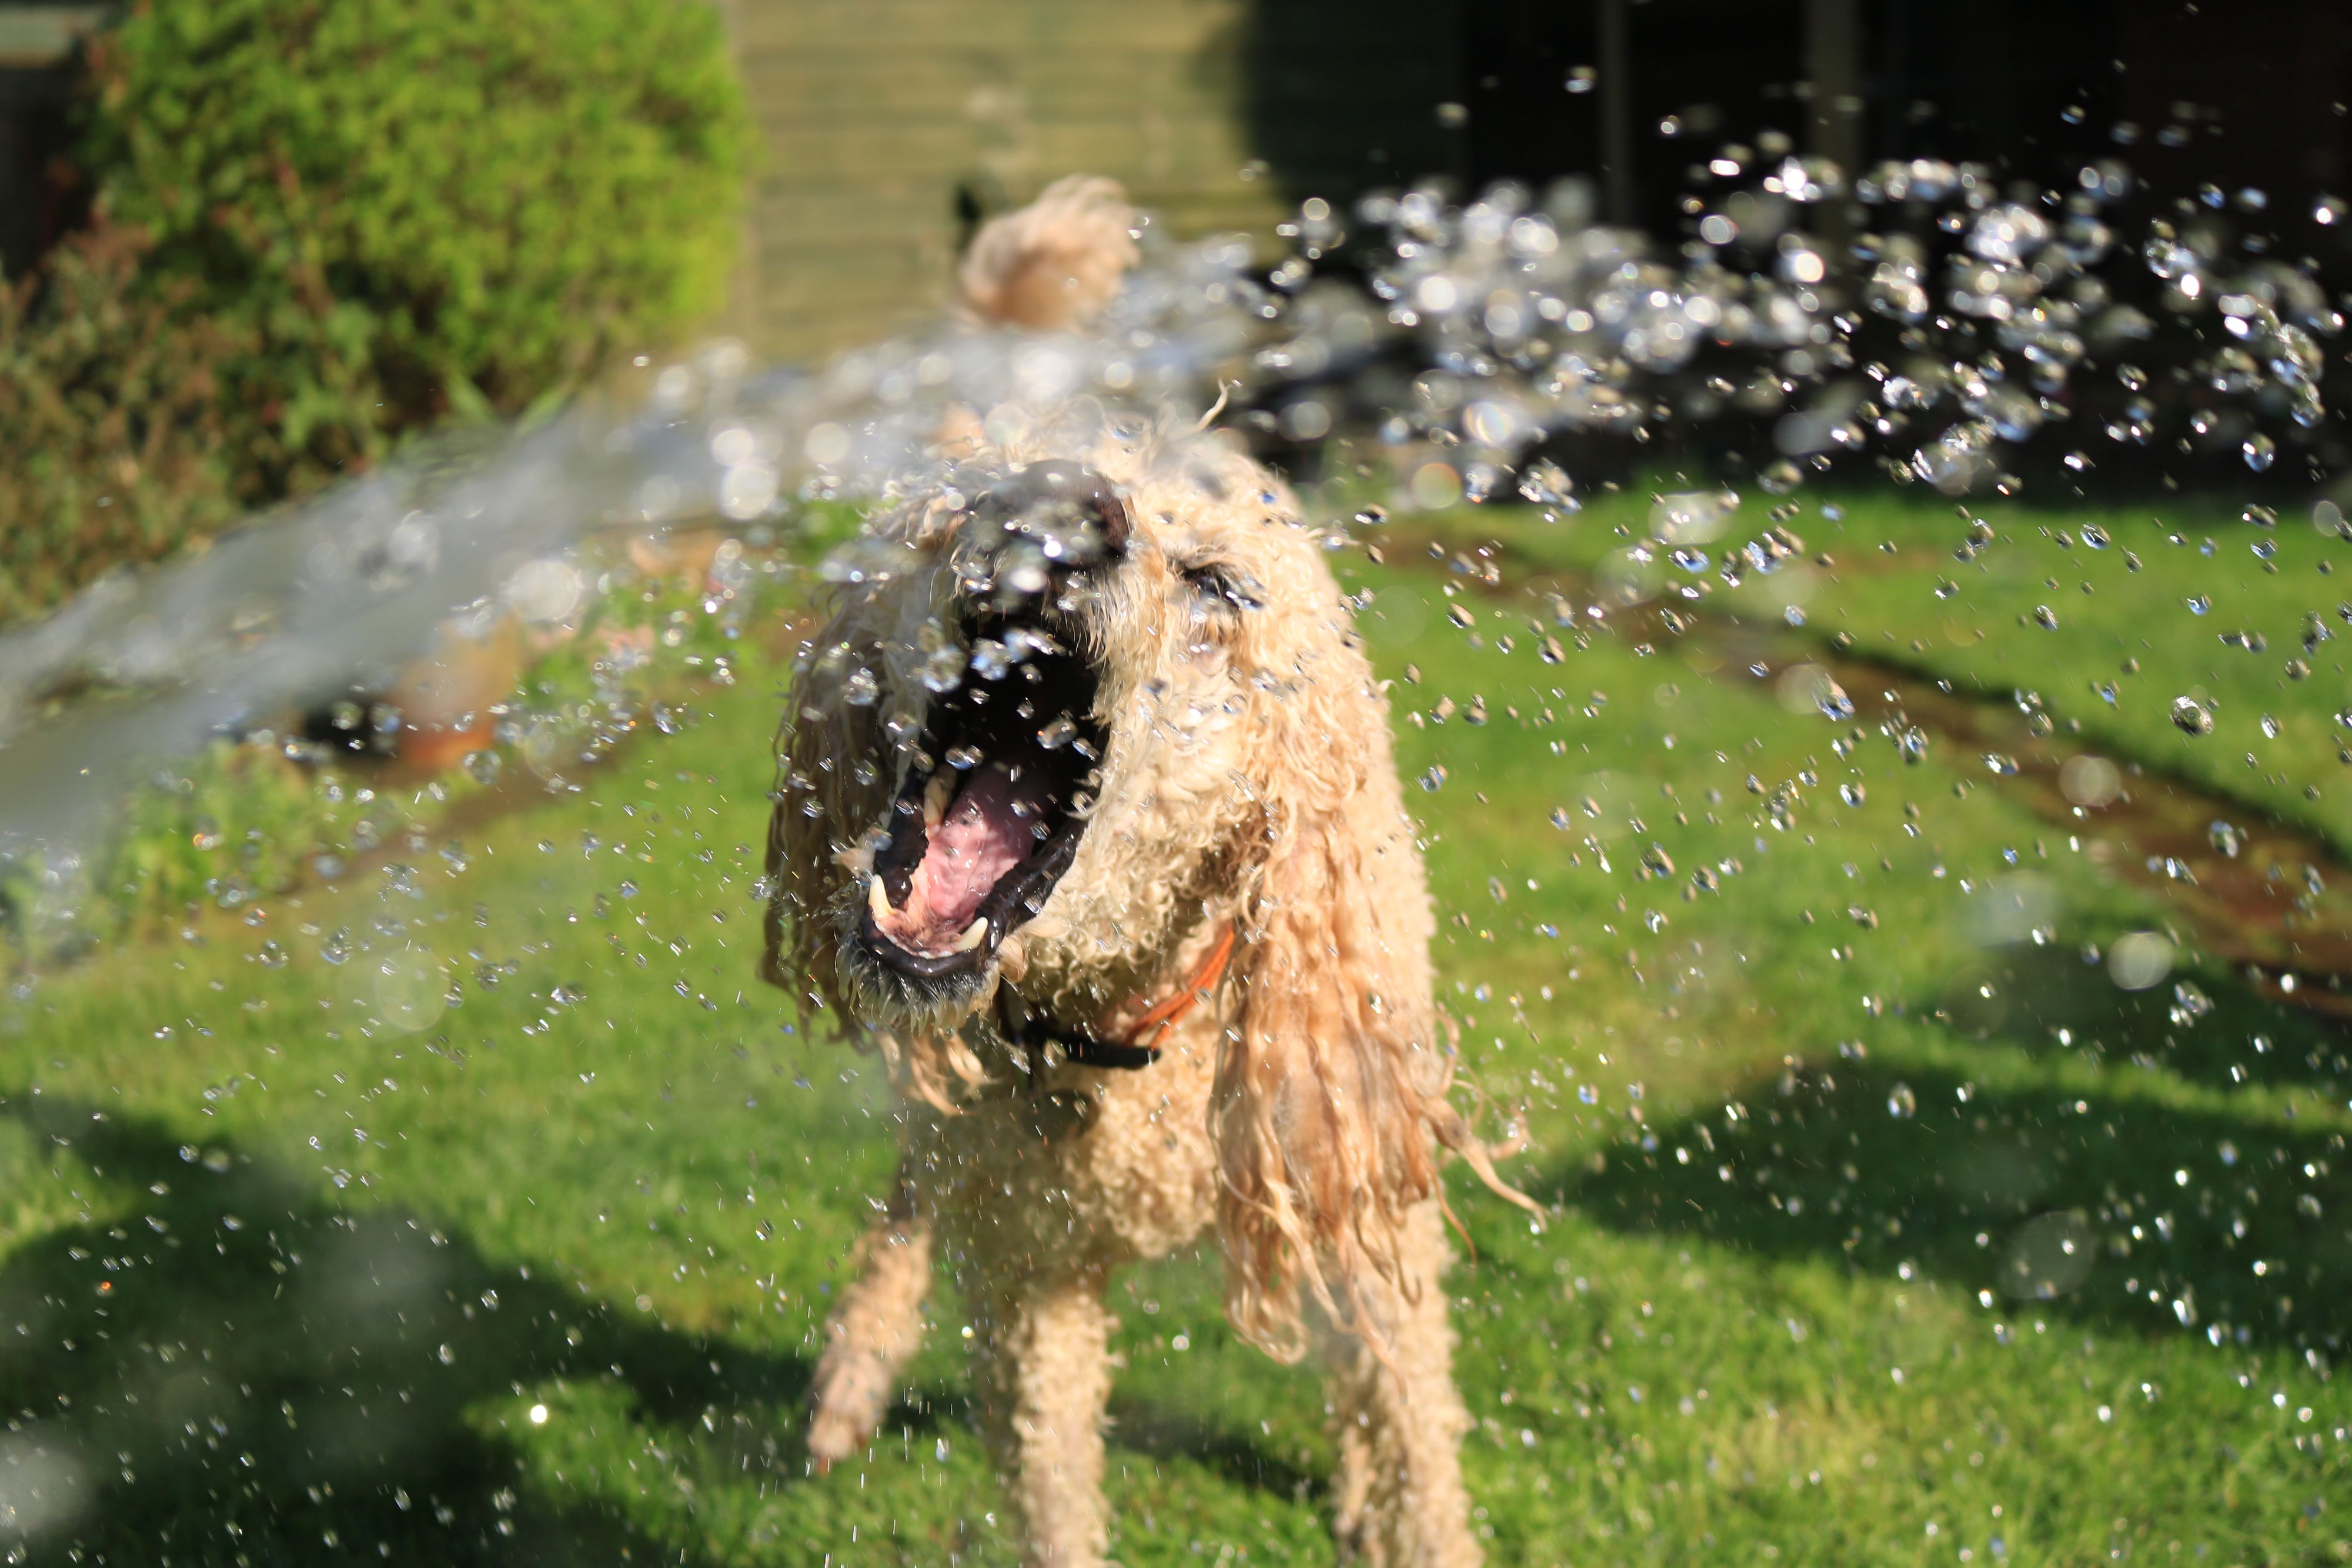 Canva - Soaked Wet Long-coated Dog Opens Mouth at Water Streams on Green Grass copy.jpg